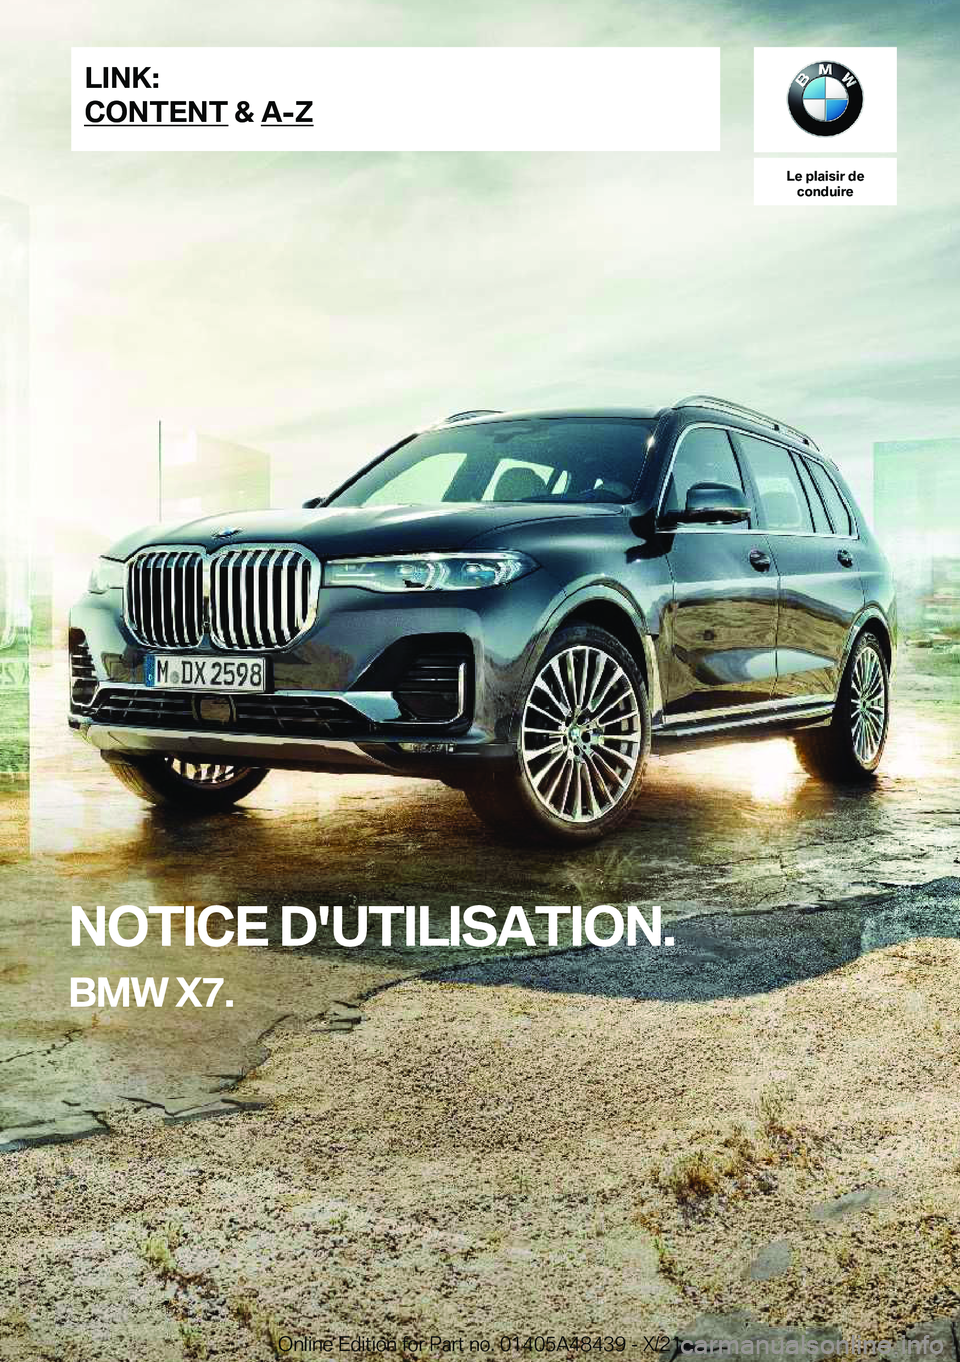 BMW X7 2022  Notices Demploi (in French) �L�e��p�l�a�i�s�i�r��d�e�c�o�n�d�u�i�r�e
�N�O�T�I�C�E��D�'�U�T�I�L�I�S�A�T�I�O�N�.
�B�M�W��X�7�.�L�I�N�K�:
�C�O�N�T�E�N�T��&��A�-�Z�O�n�l�i�n�e��E�d�i�t�i�o�n��f�o�r��P�a�r�t��n�o�.��0�